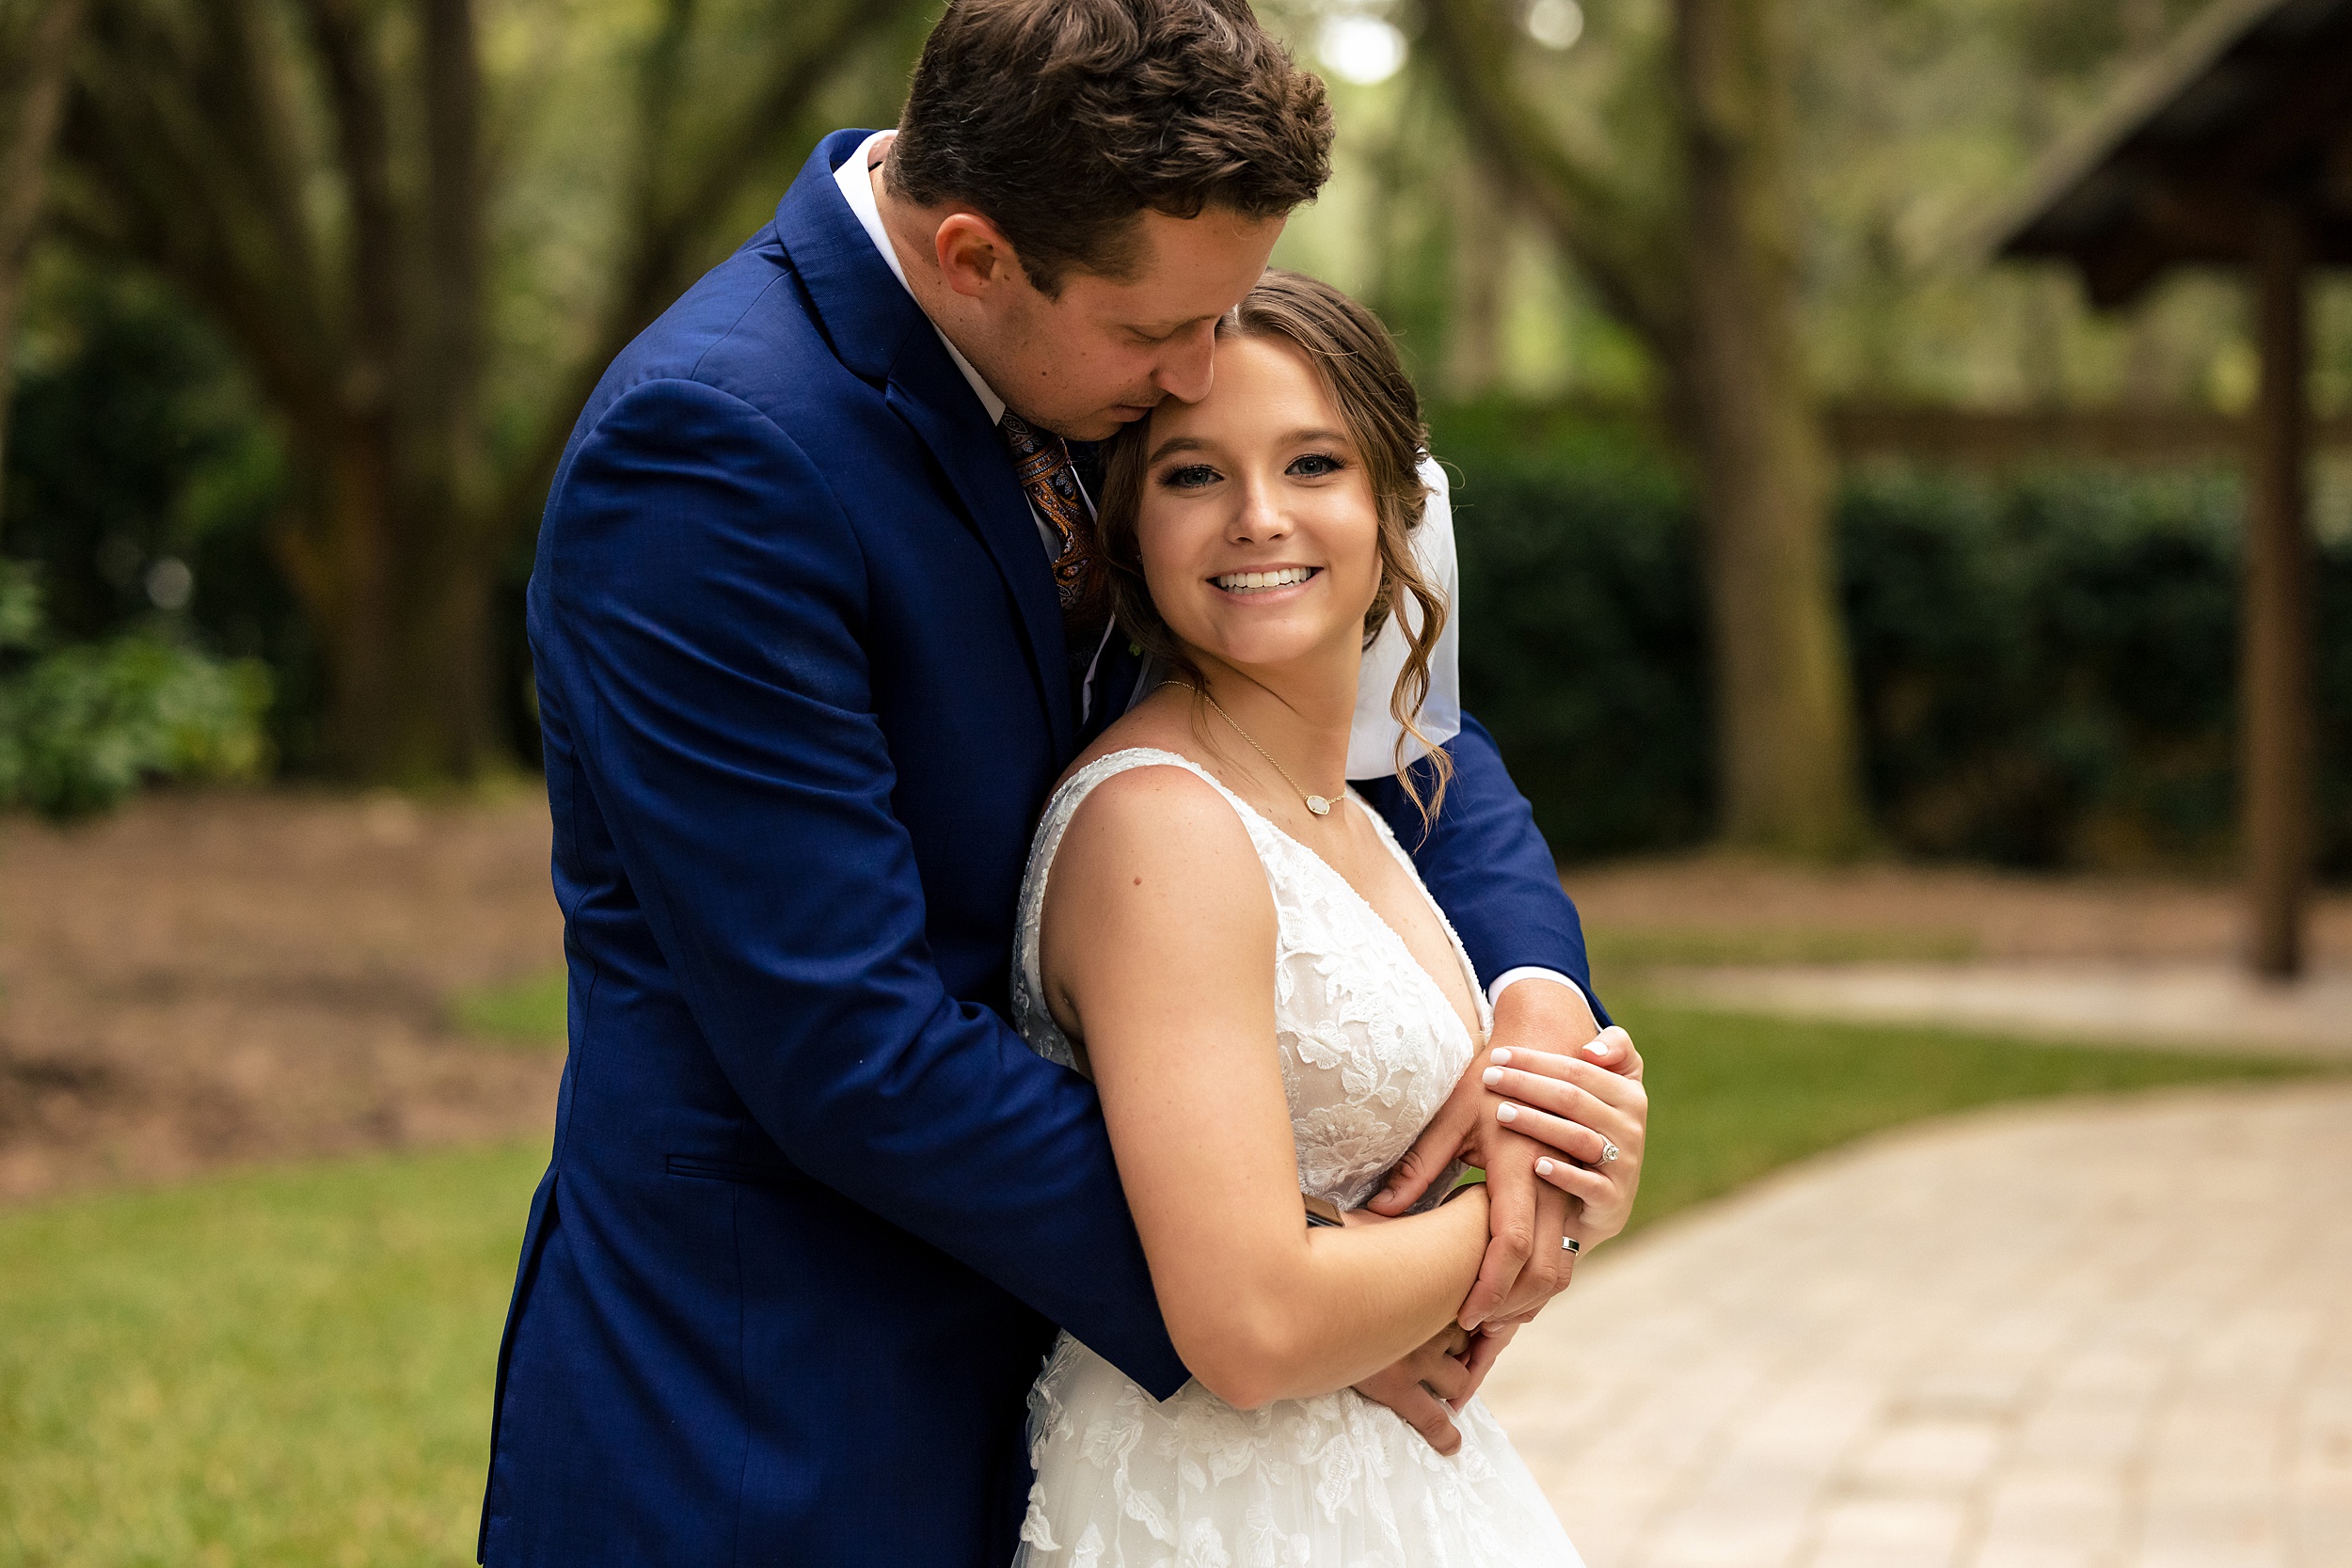 Newlyweds embrace while standing on a patio in a garden in a blue suit and lace dress